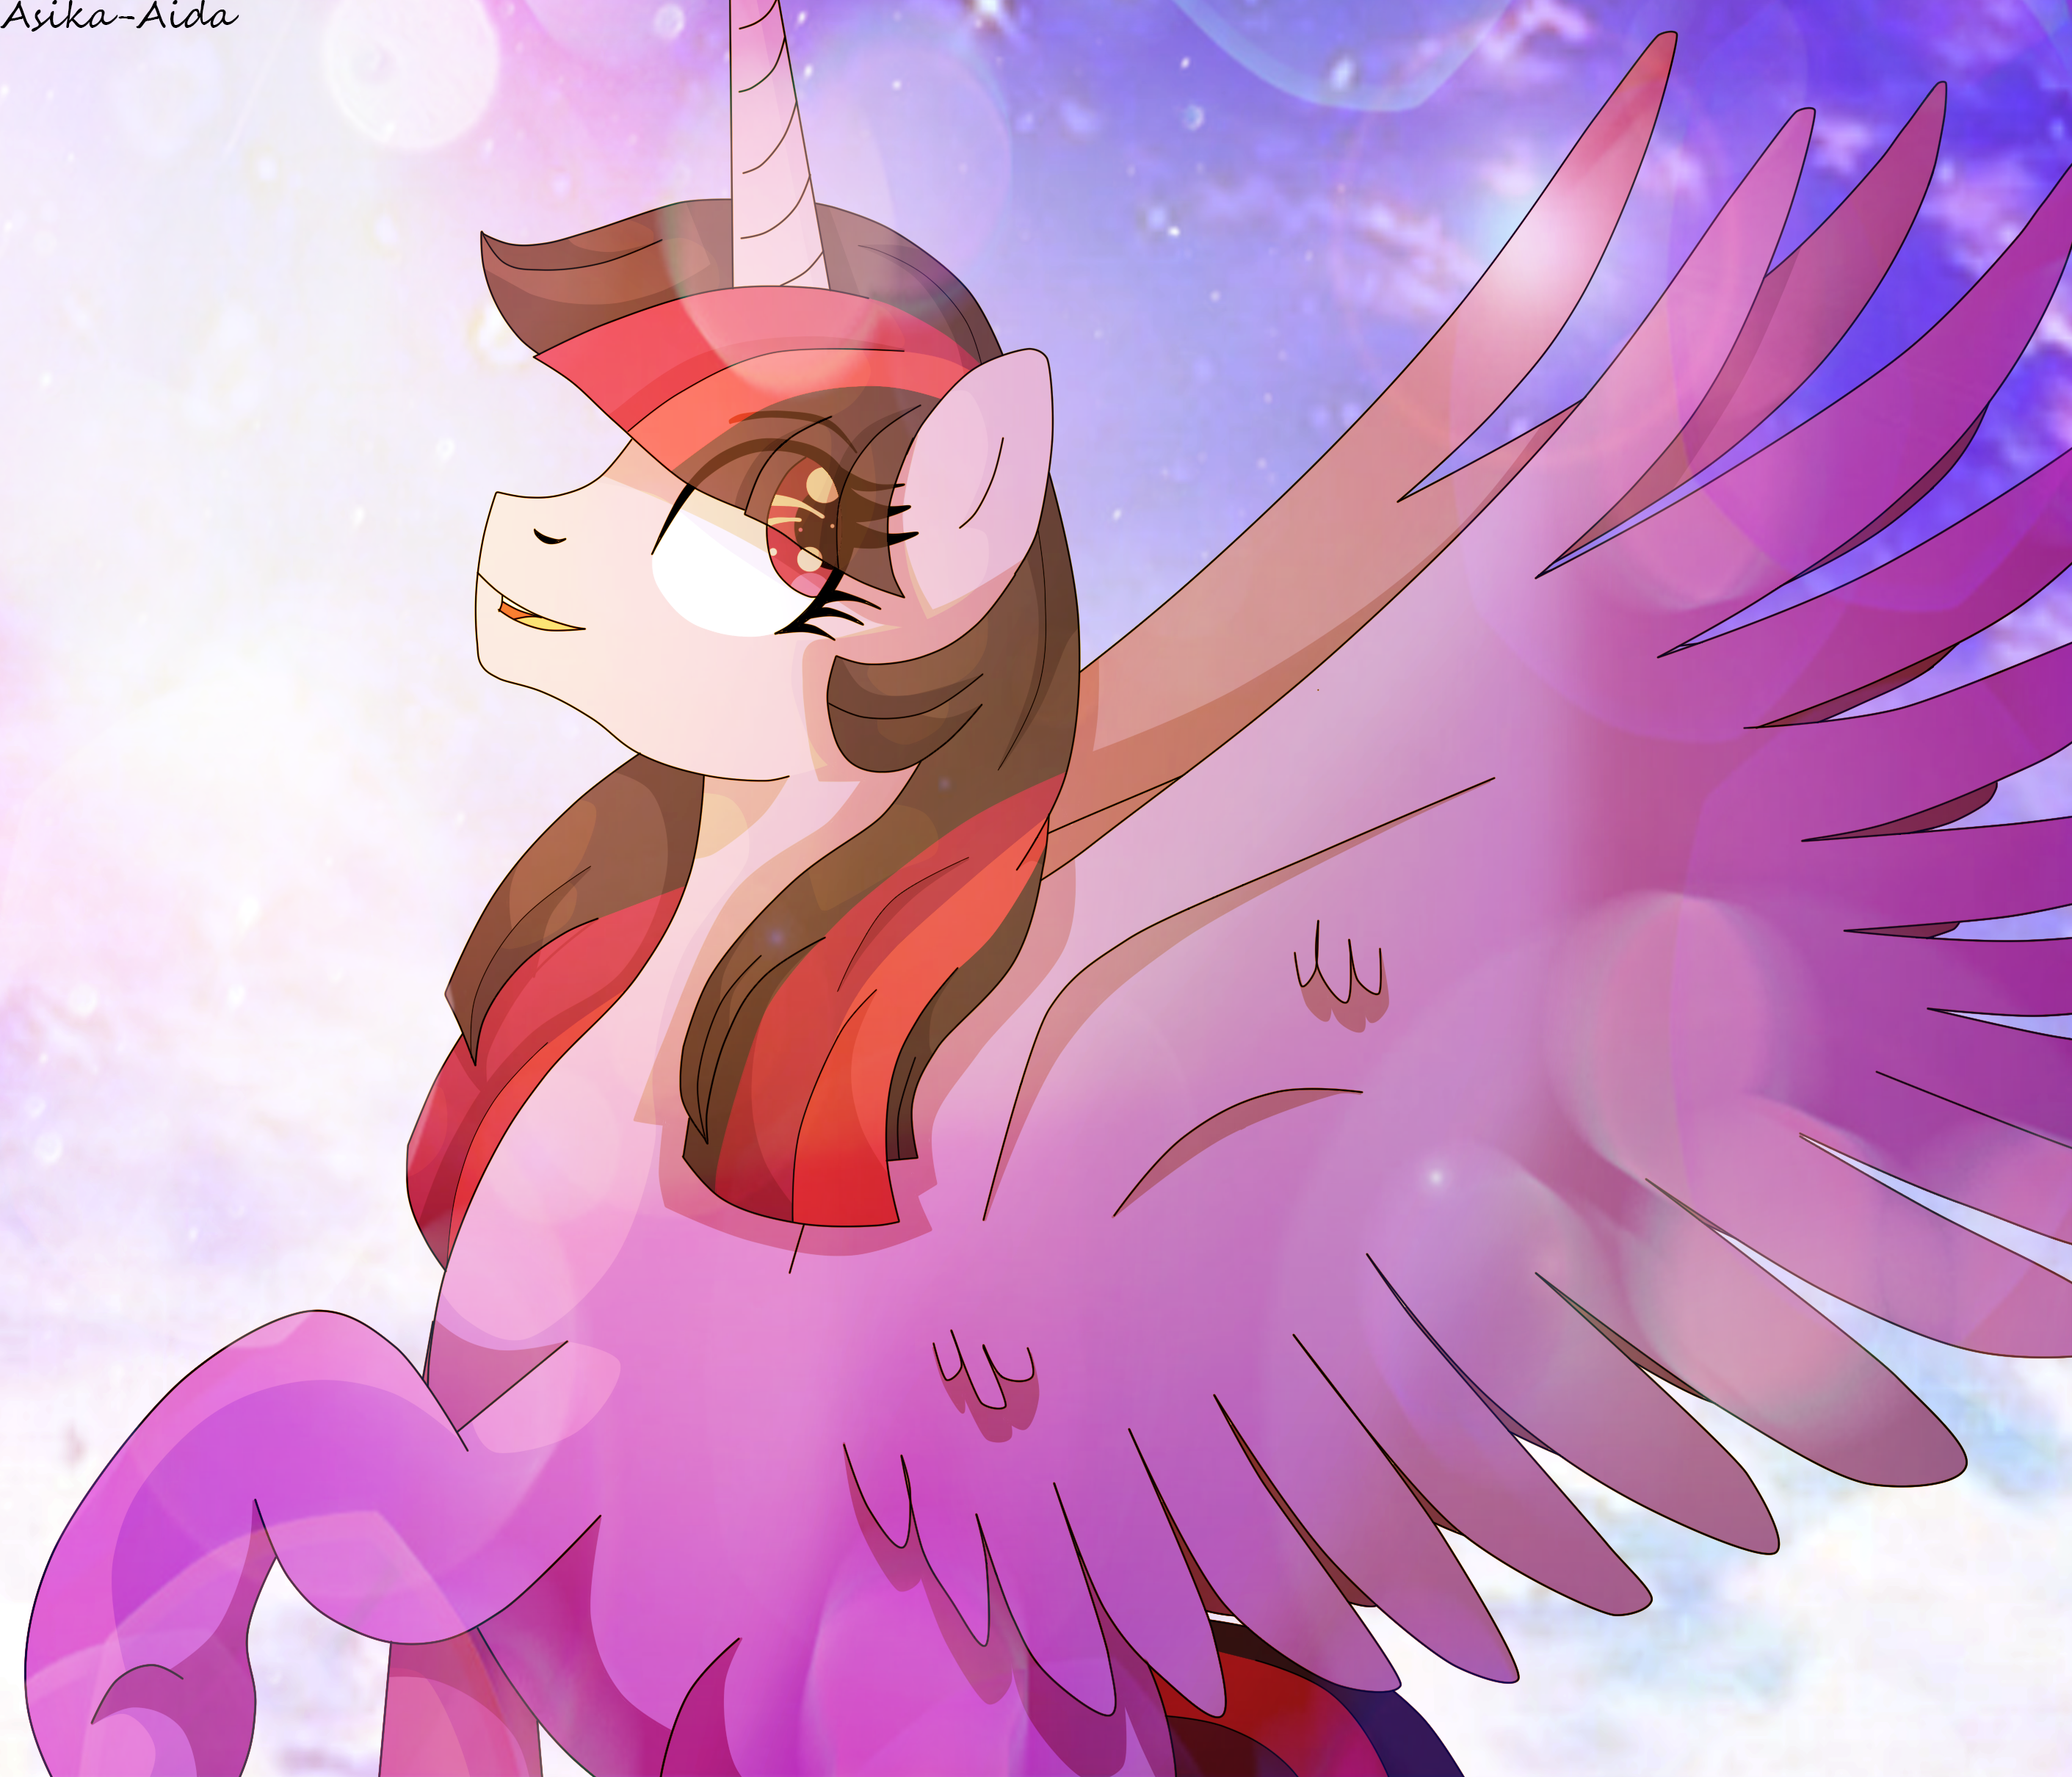 another_way_by_asika_aida-dalzo0q.png